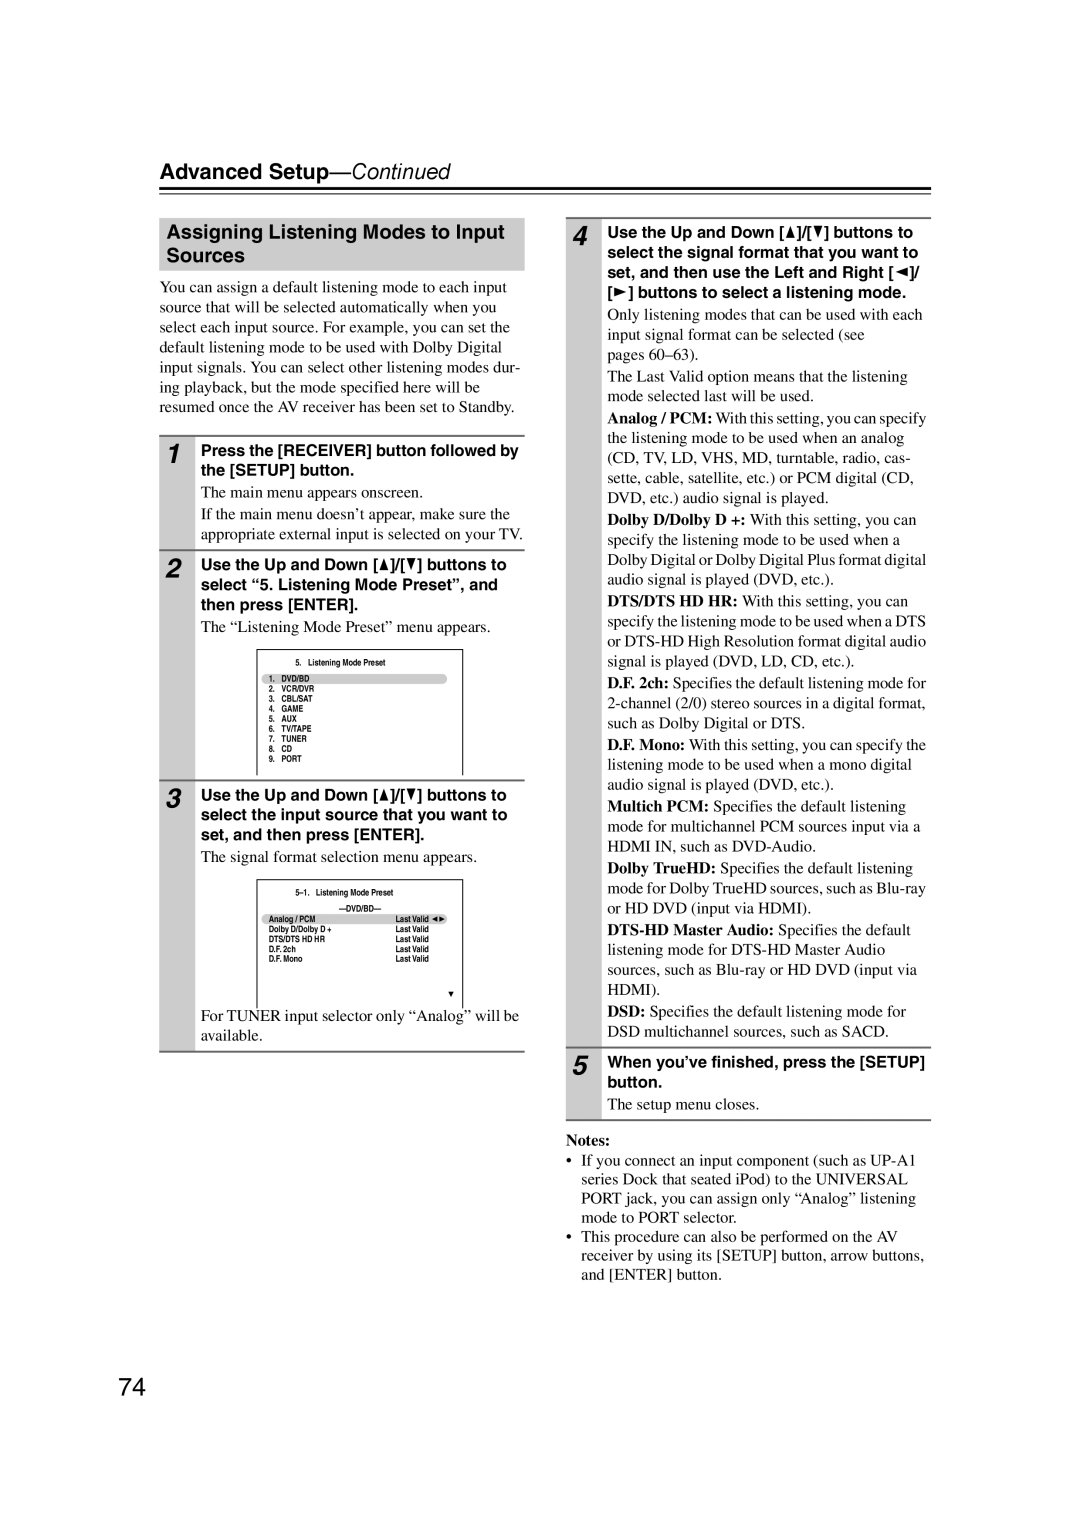 Onkyo HT-RC160 instruction manual Assigning Listening Modes to Input Sources, Notes 